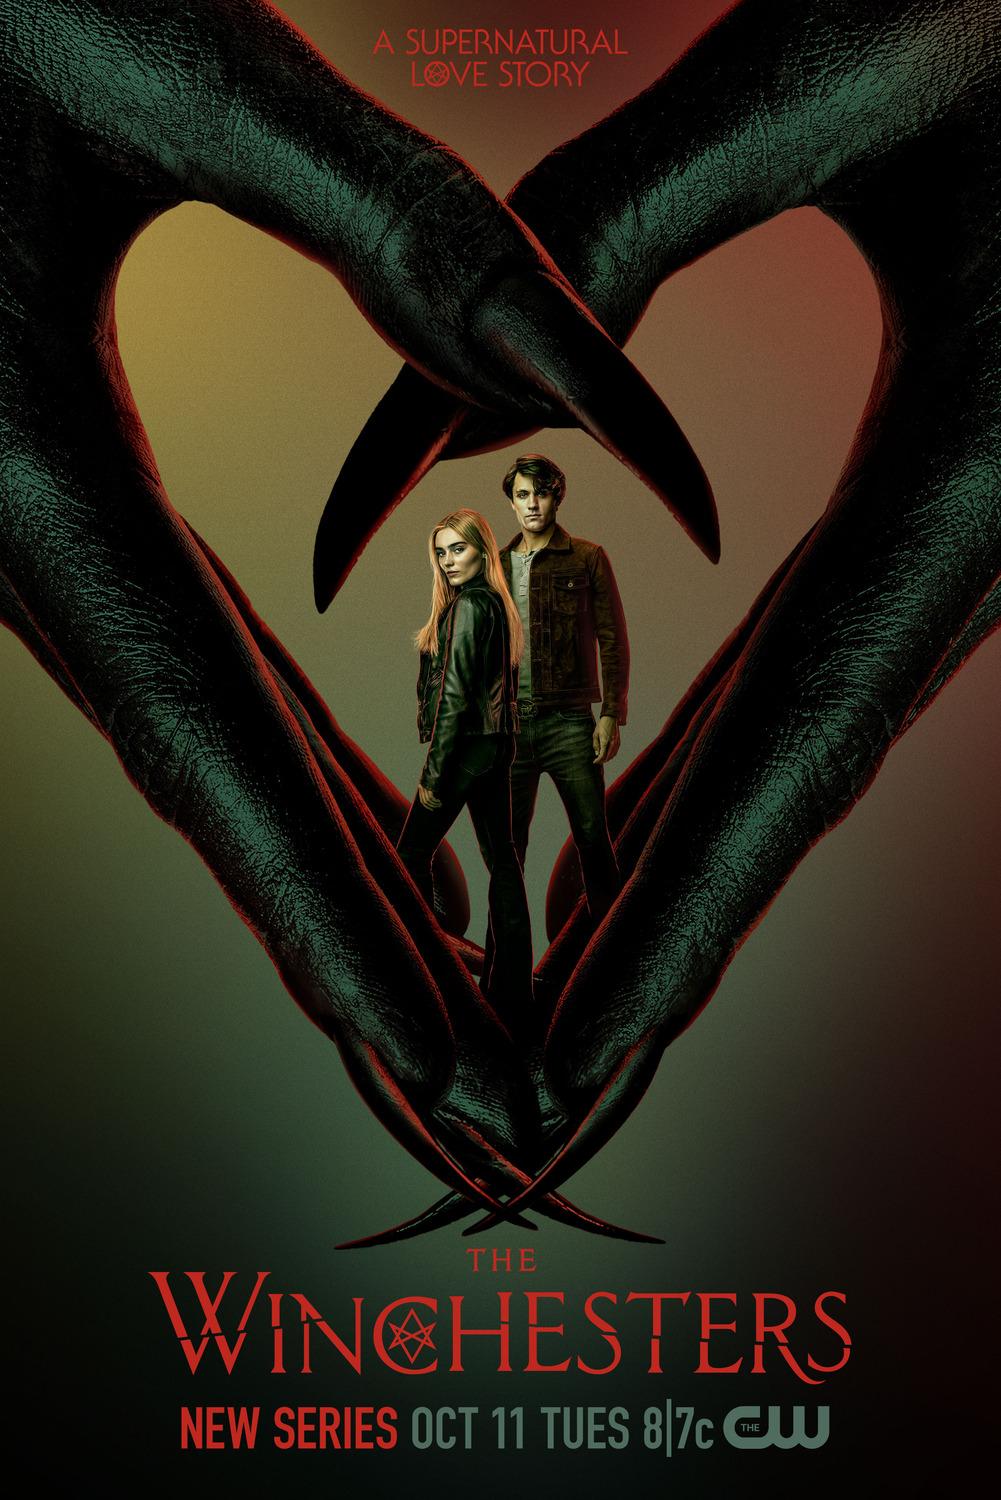 Extra Large TV Poster Image for The Winchesters (#2 of 11)